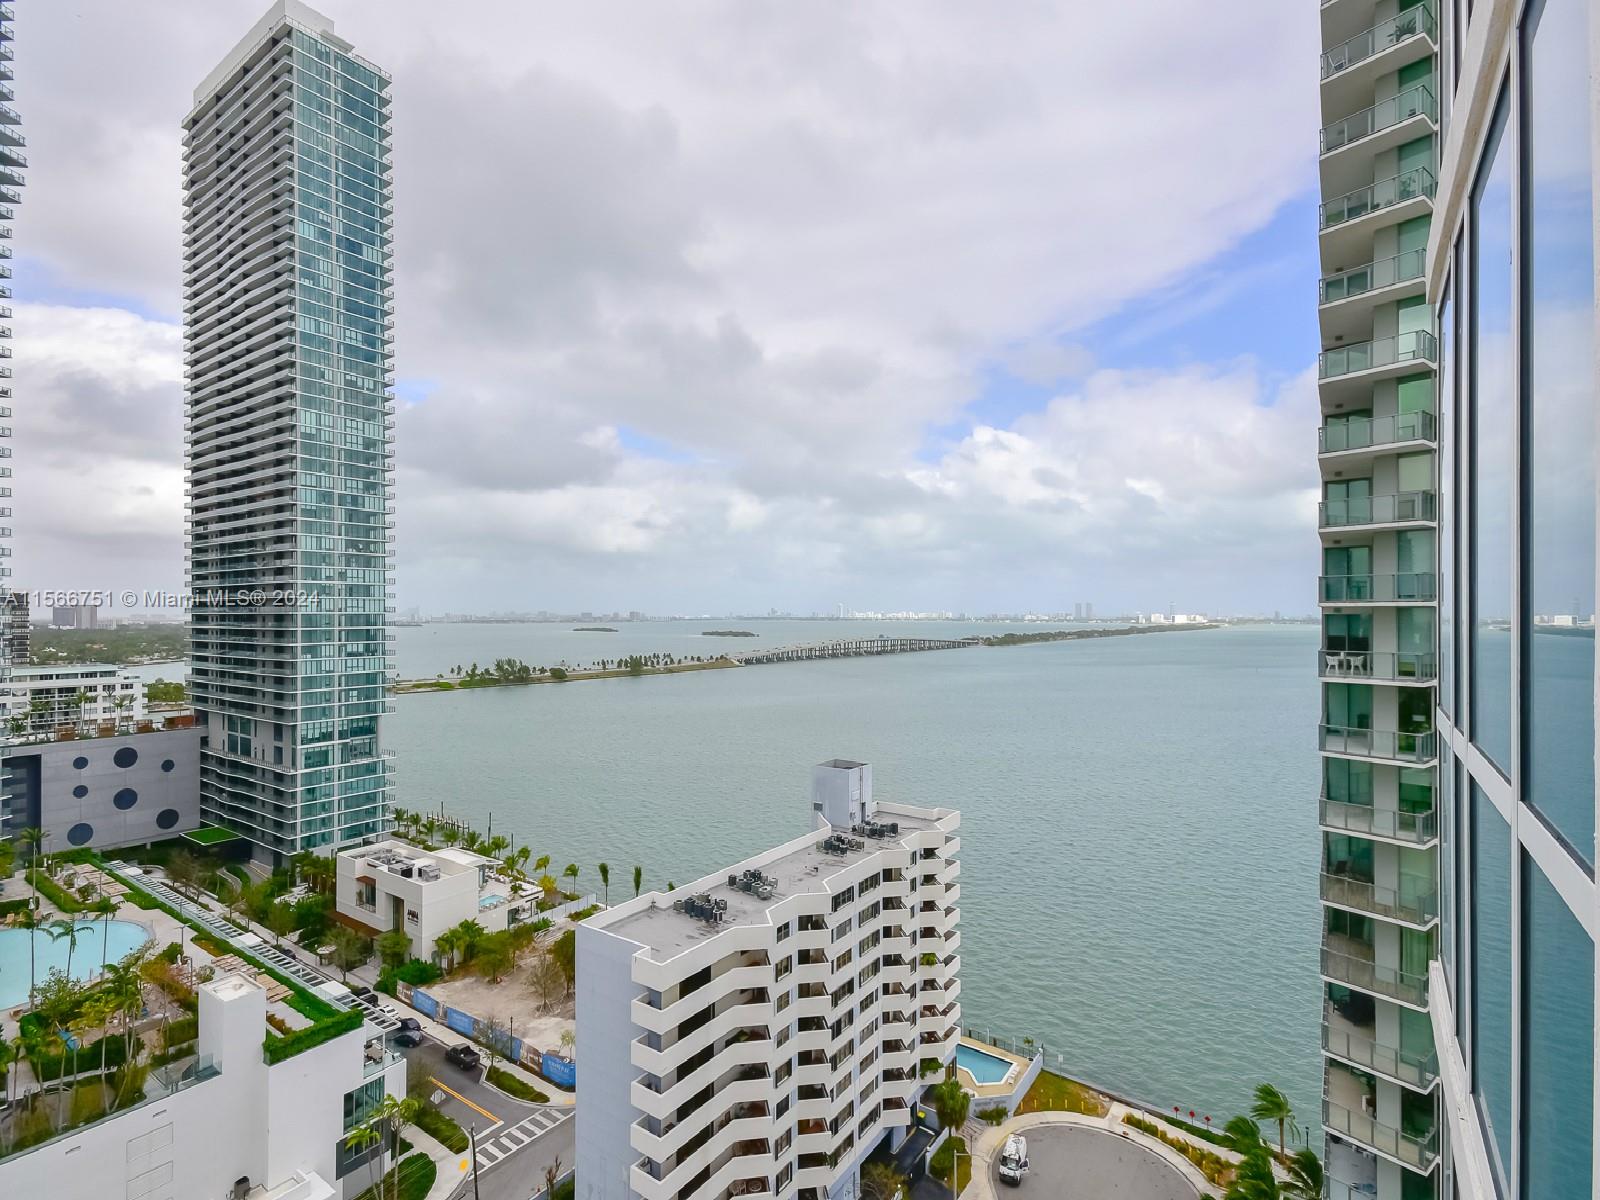 This spacious 1 bed 1.5 Bath FURNISHED unit is a MUST SEE! With stunning views of Miami Beach's skyline, the bay and the city, this charming unit features Ceramic tile & wood floors, a spacious open kitchen w/ SS appliances, newer bathrooms & two spacious balconies off the living room & the master suite. W/ lots of natural light coming in, great closet space & washer & dryer in-unit, this is the perfect place to call it a home. Building amenities include gym, steam room, 24-hour security + a resort style pool. Conveniently located in Edgewater & within walking distance to local restaurants, shops, Margaret Pace Park, The Adrienne Arsht Center for the Performing Arts and within a 10 min drive to Wynwood & Miami Beach. Rent incl. water, internet and basic cable.